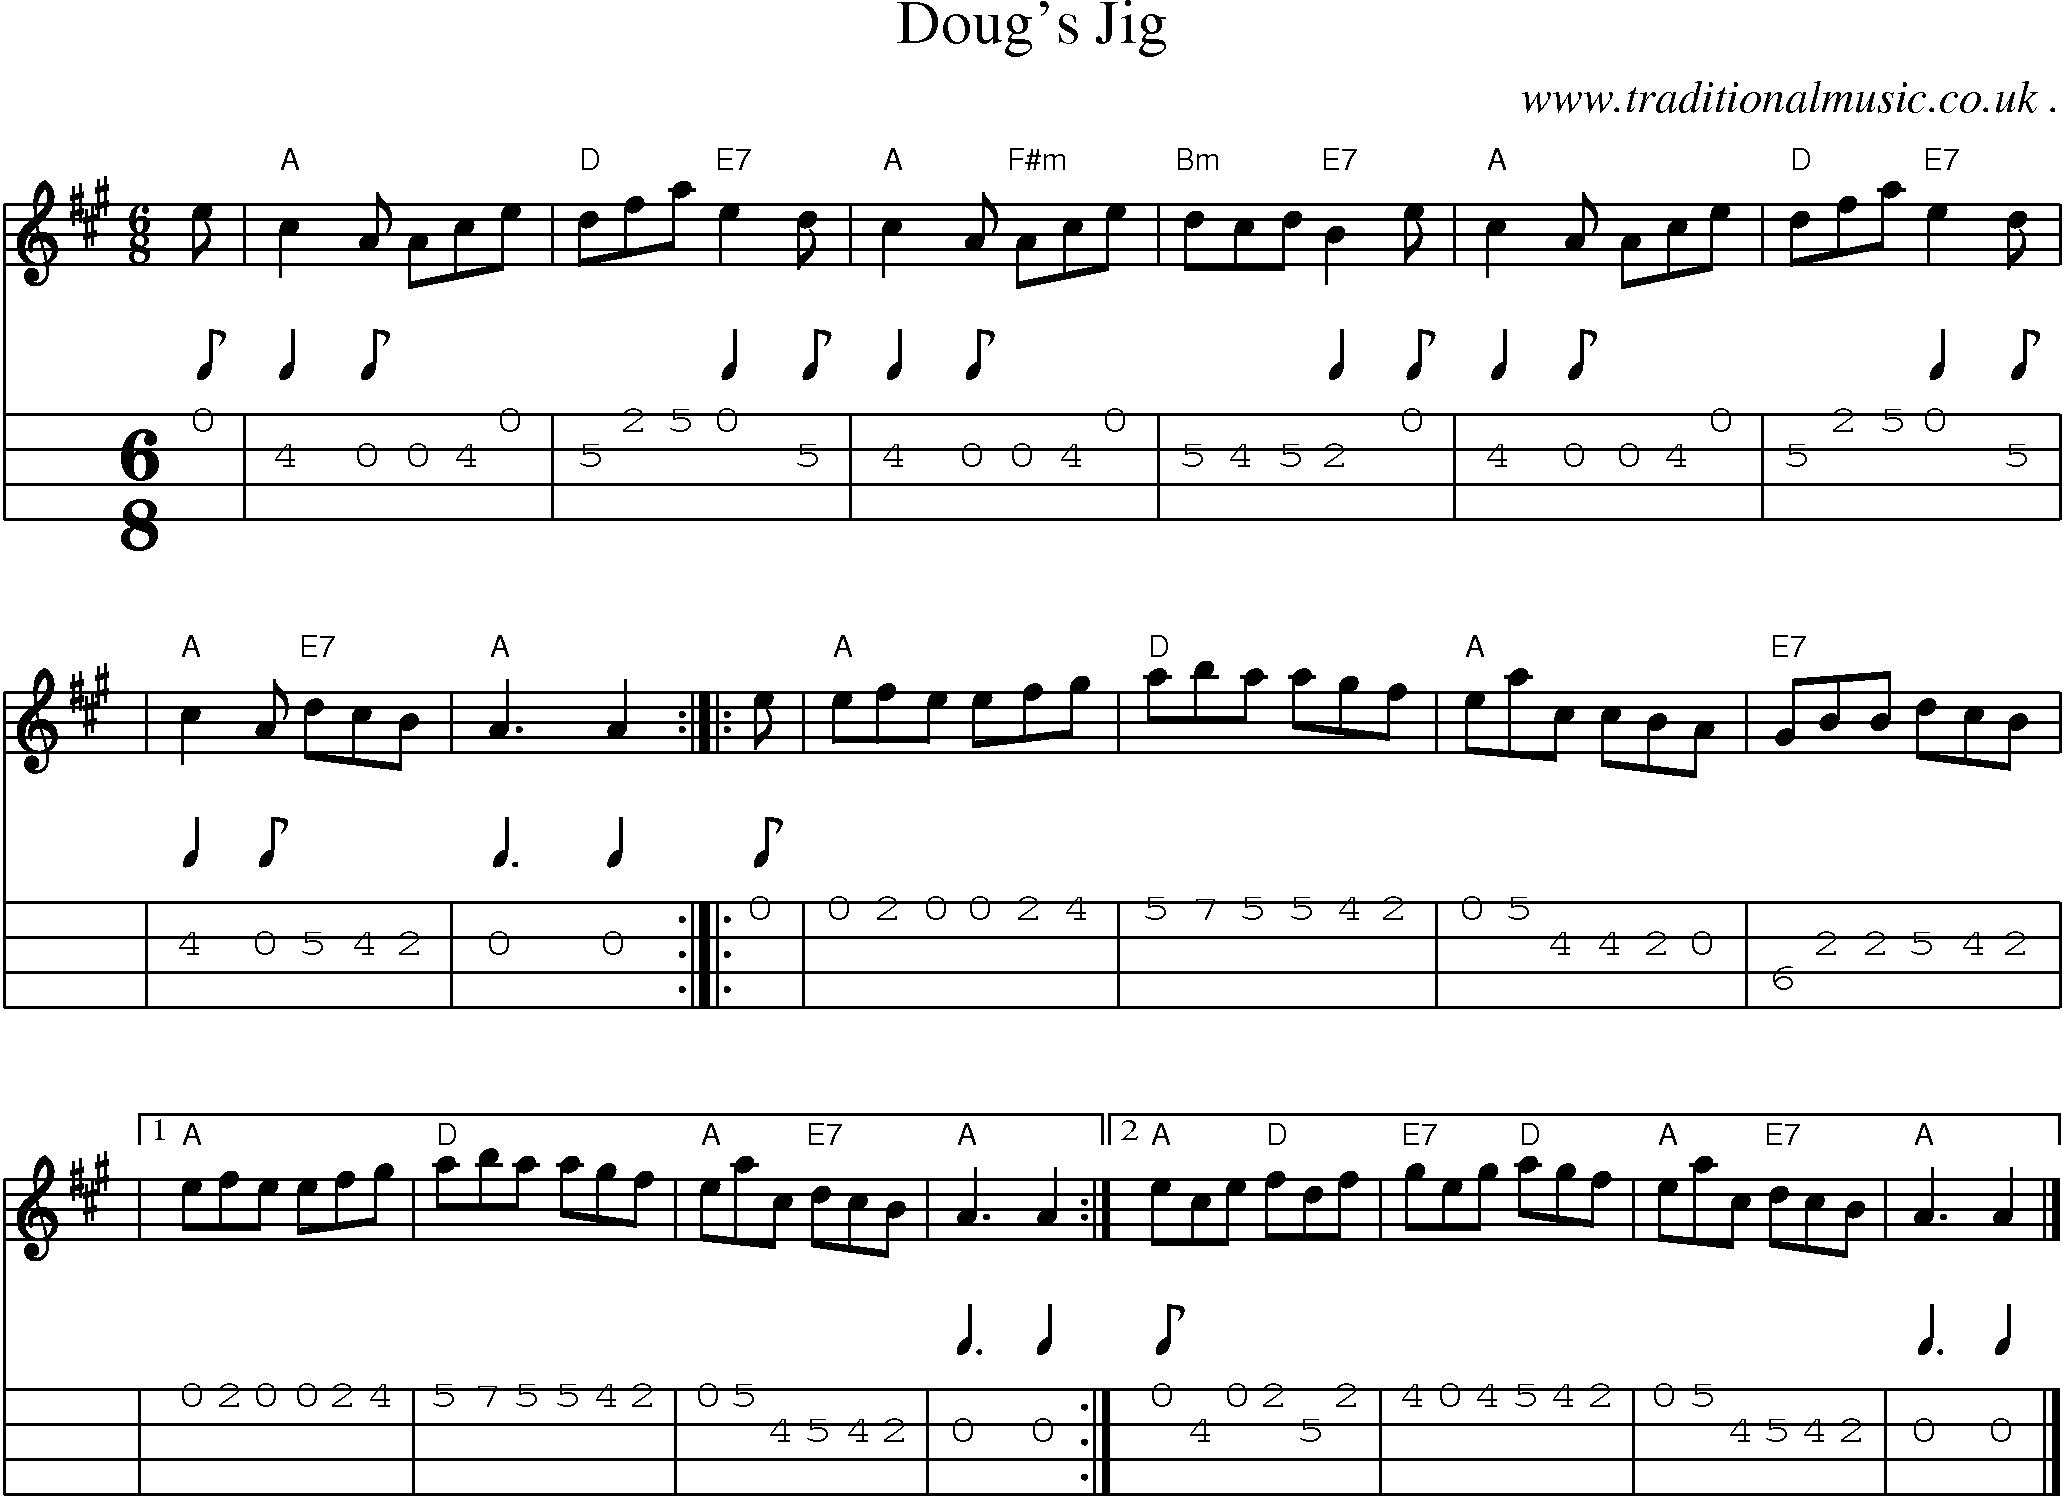 Sheet-music  score, Chords and Mandolin Tabs for Dougs Jig